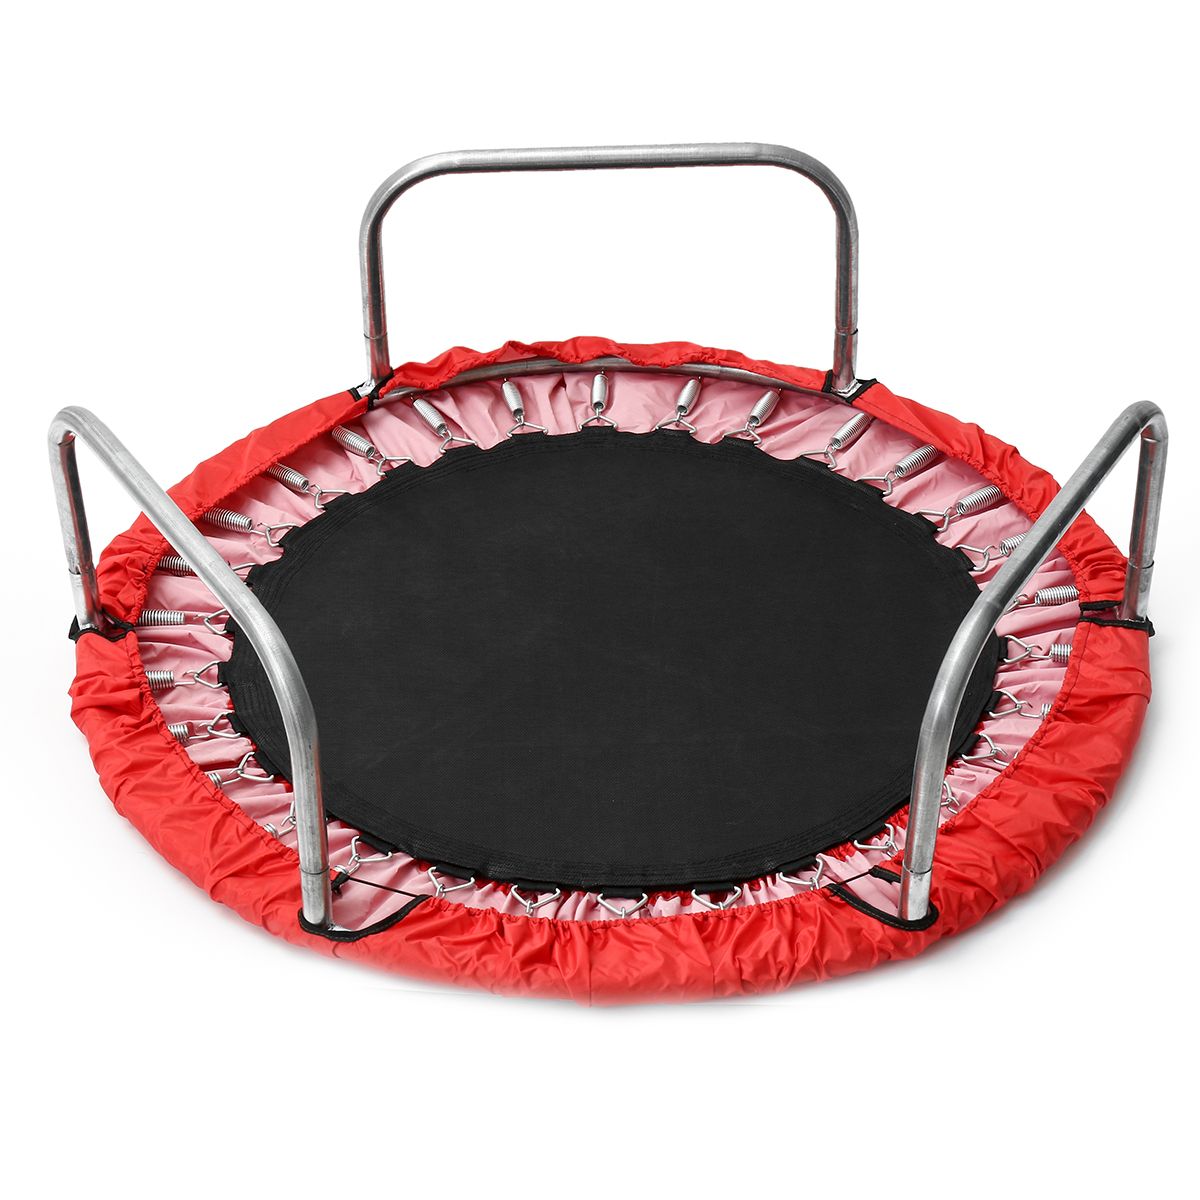 40-inch-Mini-Fitness-Trampoline-Home-Gym-Fun-Exercise-Rebounder-for-Kids-amp-Adults-1755387